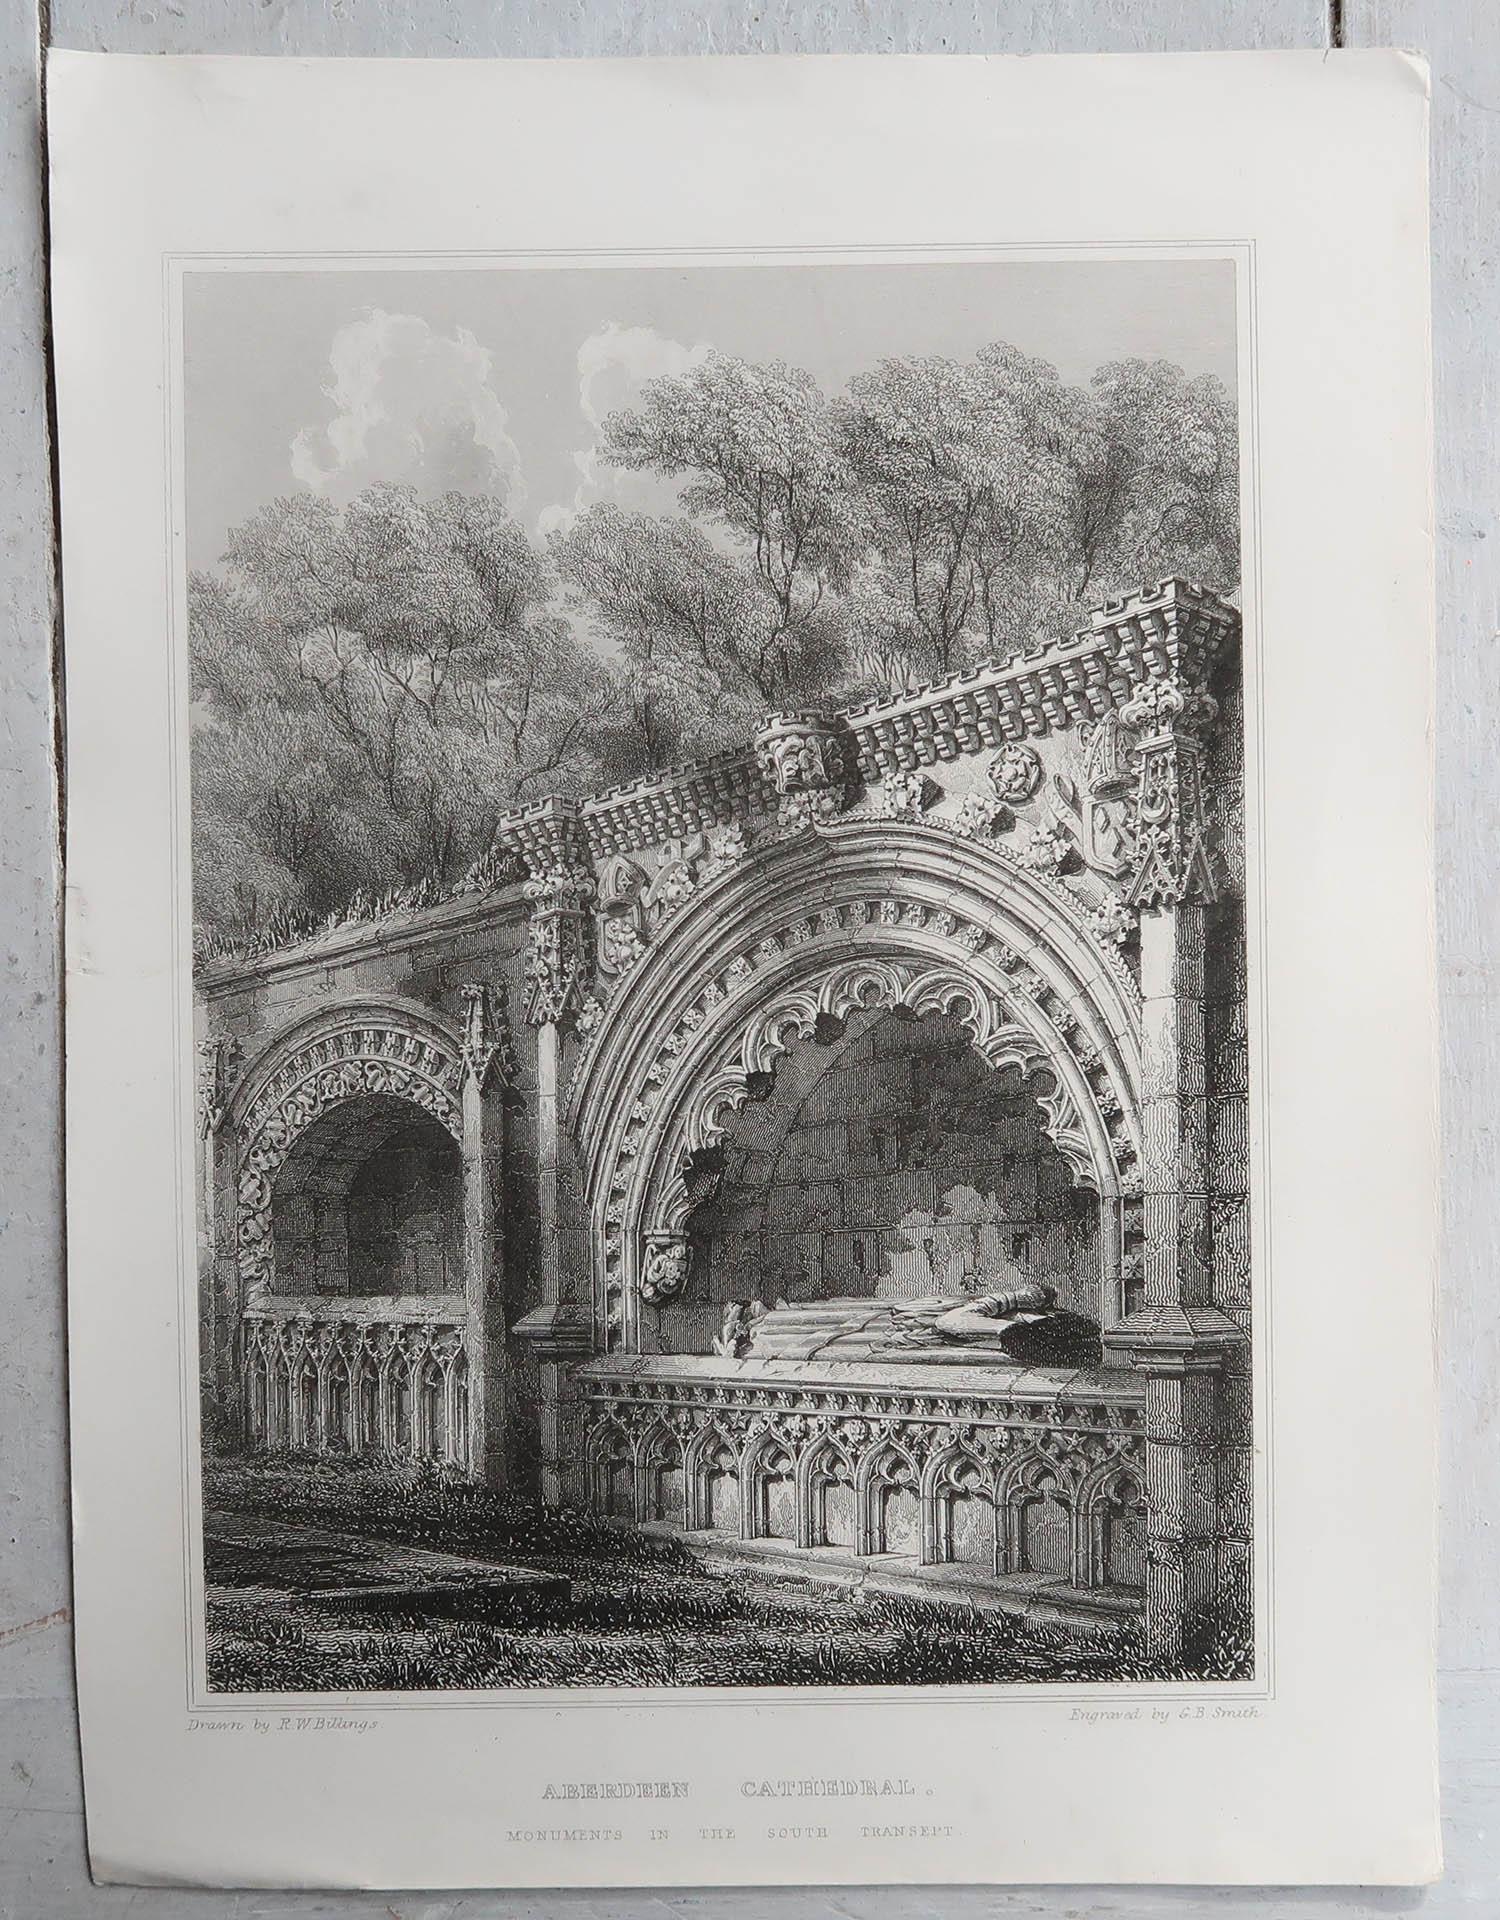 Gothic Revival Set of 18 Gothic Architectural Prints After Robert William Billings, Dated, 1848